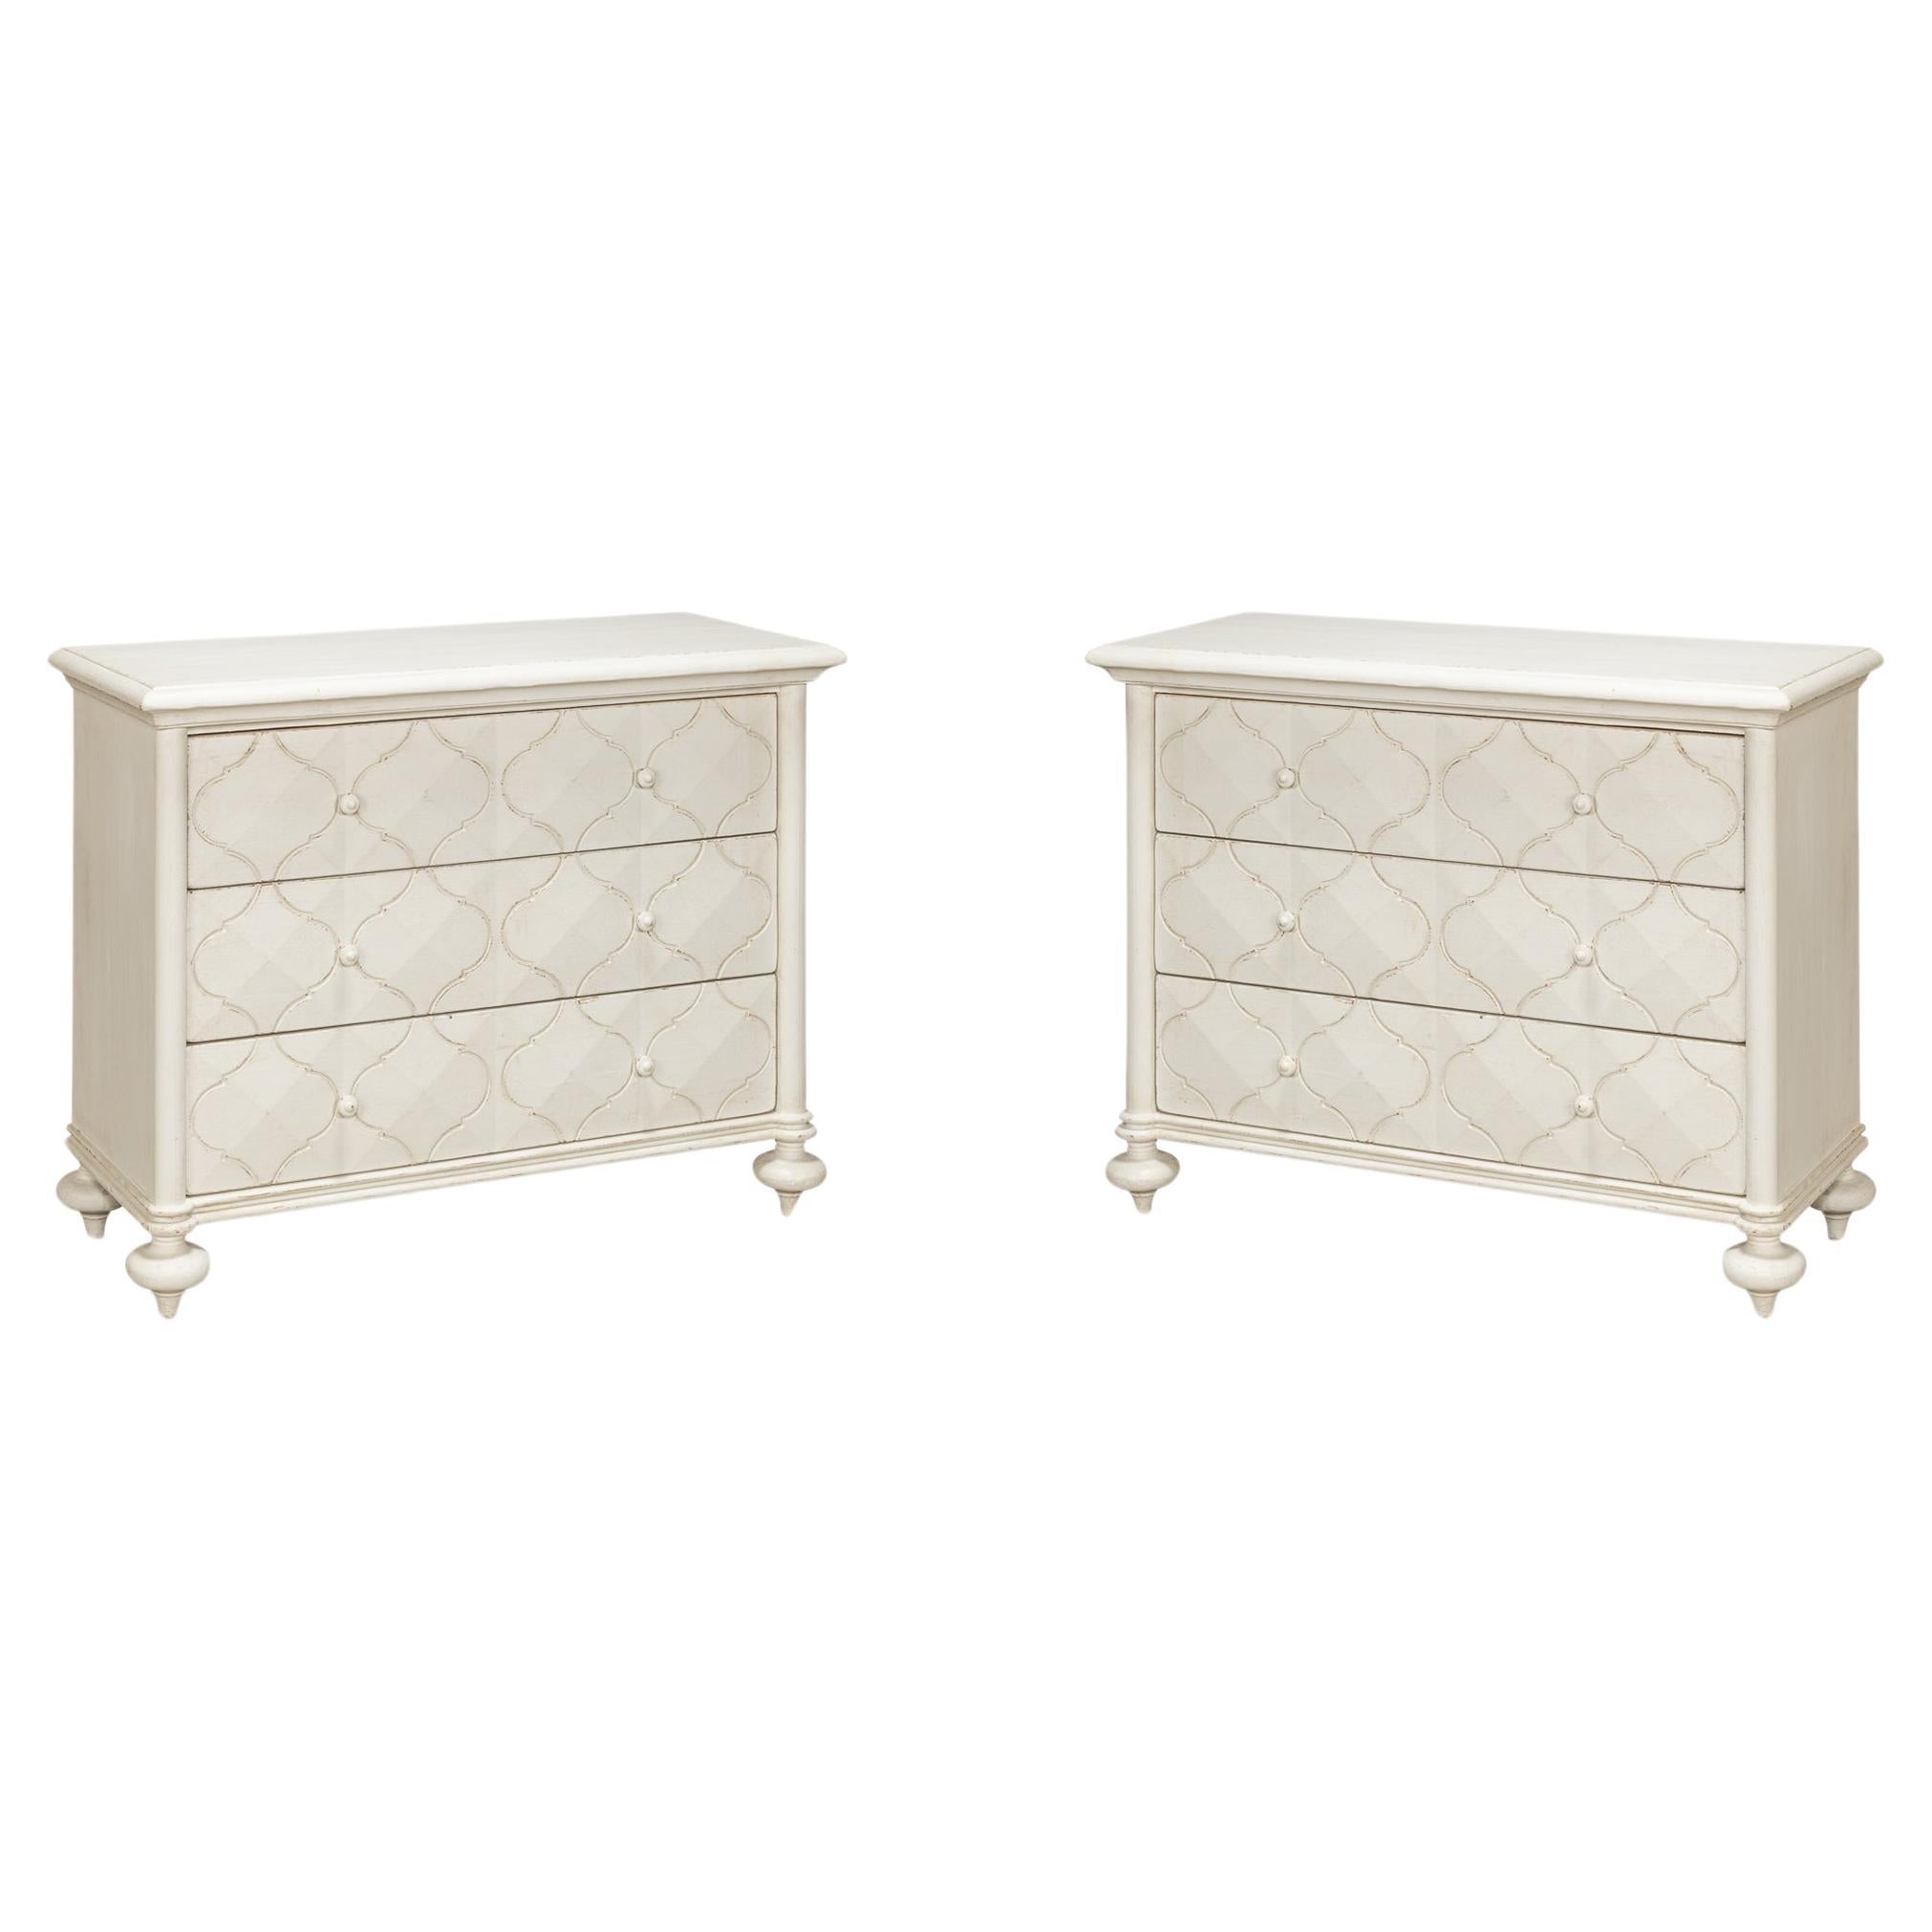 Pair of Moroccan Antique White Chest of Drawers For Sale